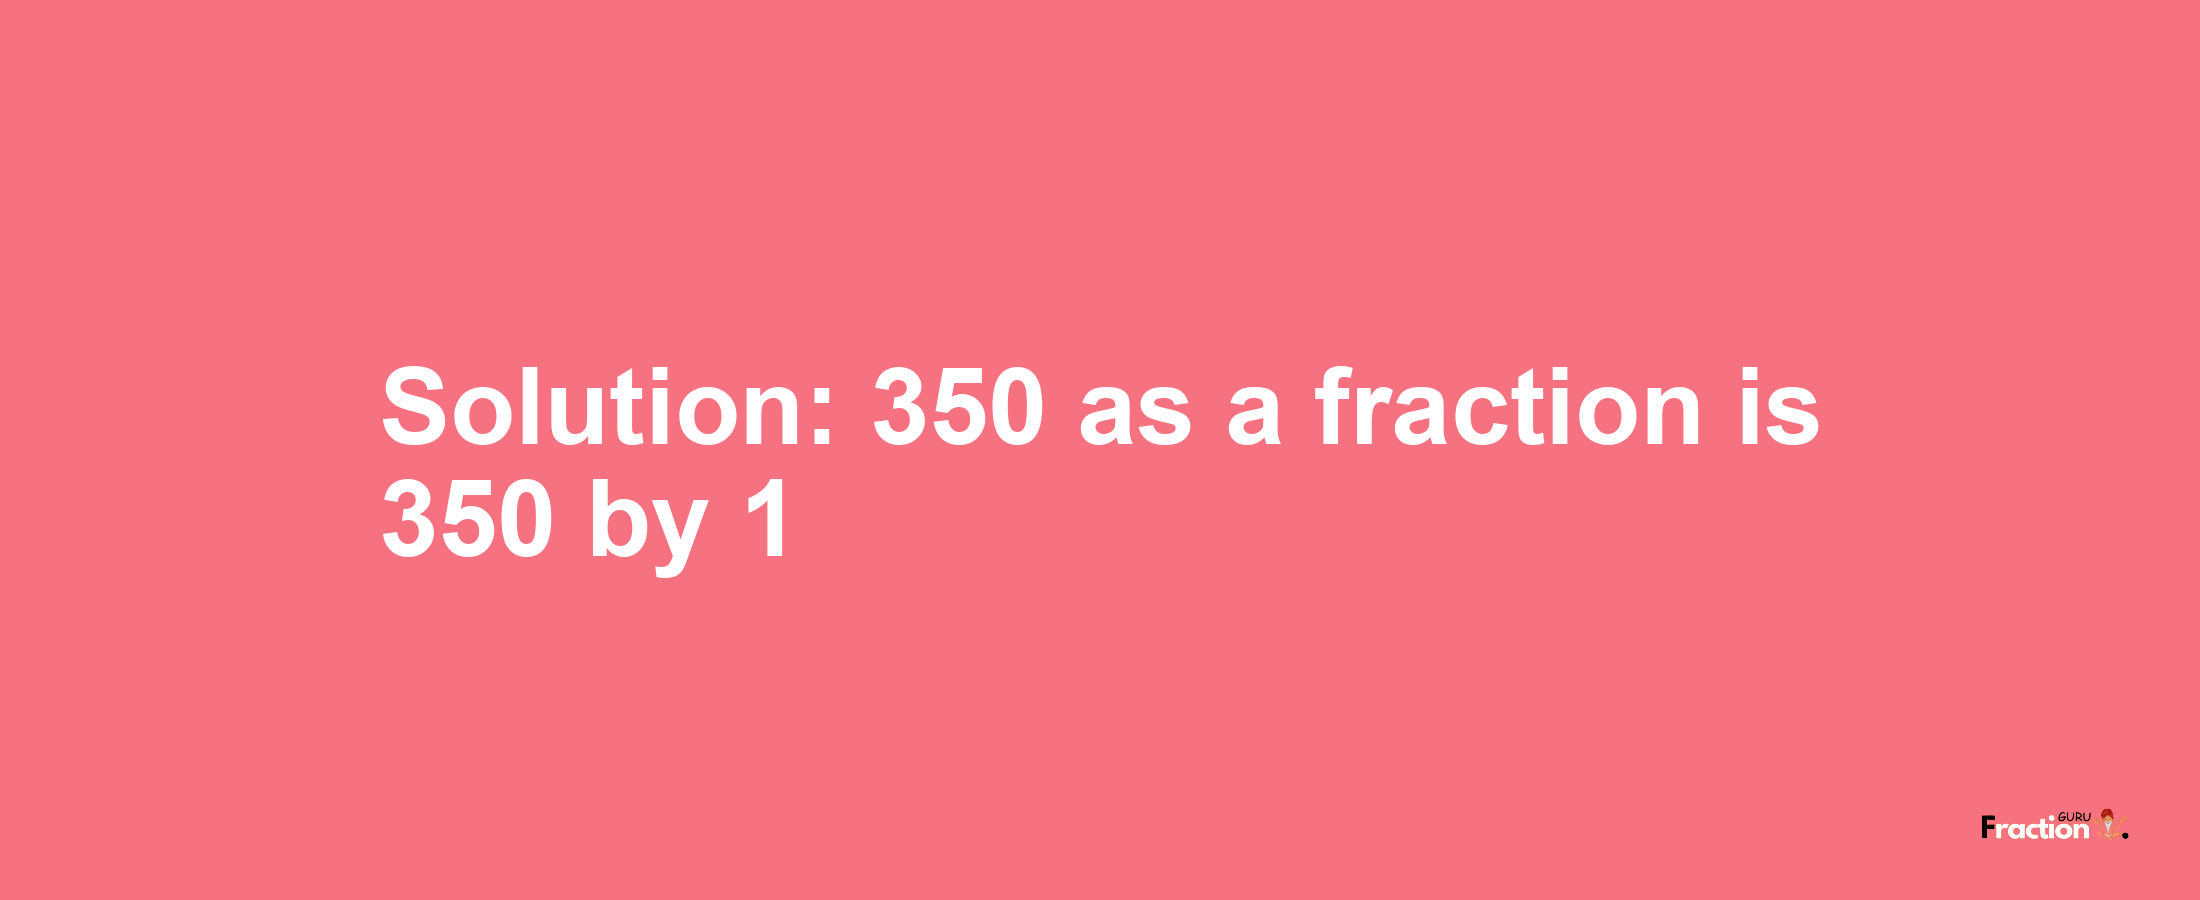 Solution:350 as a fraction is 350/1